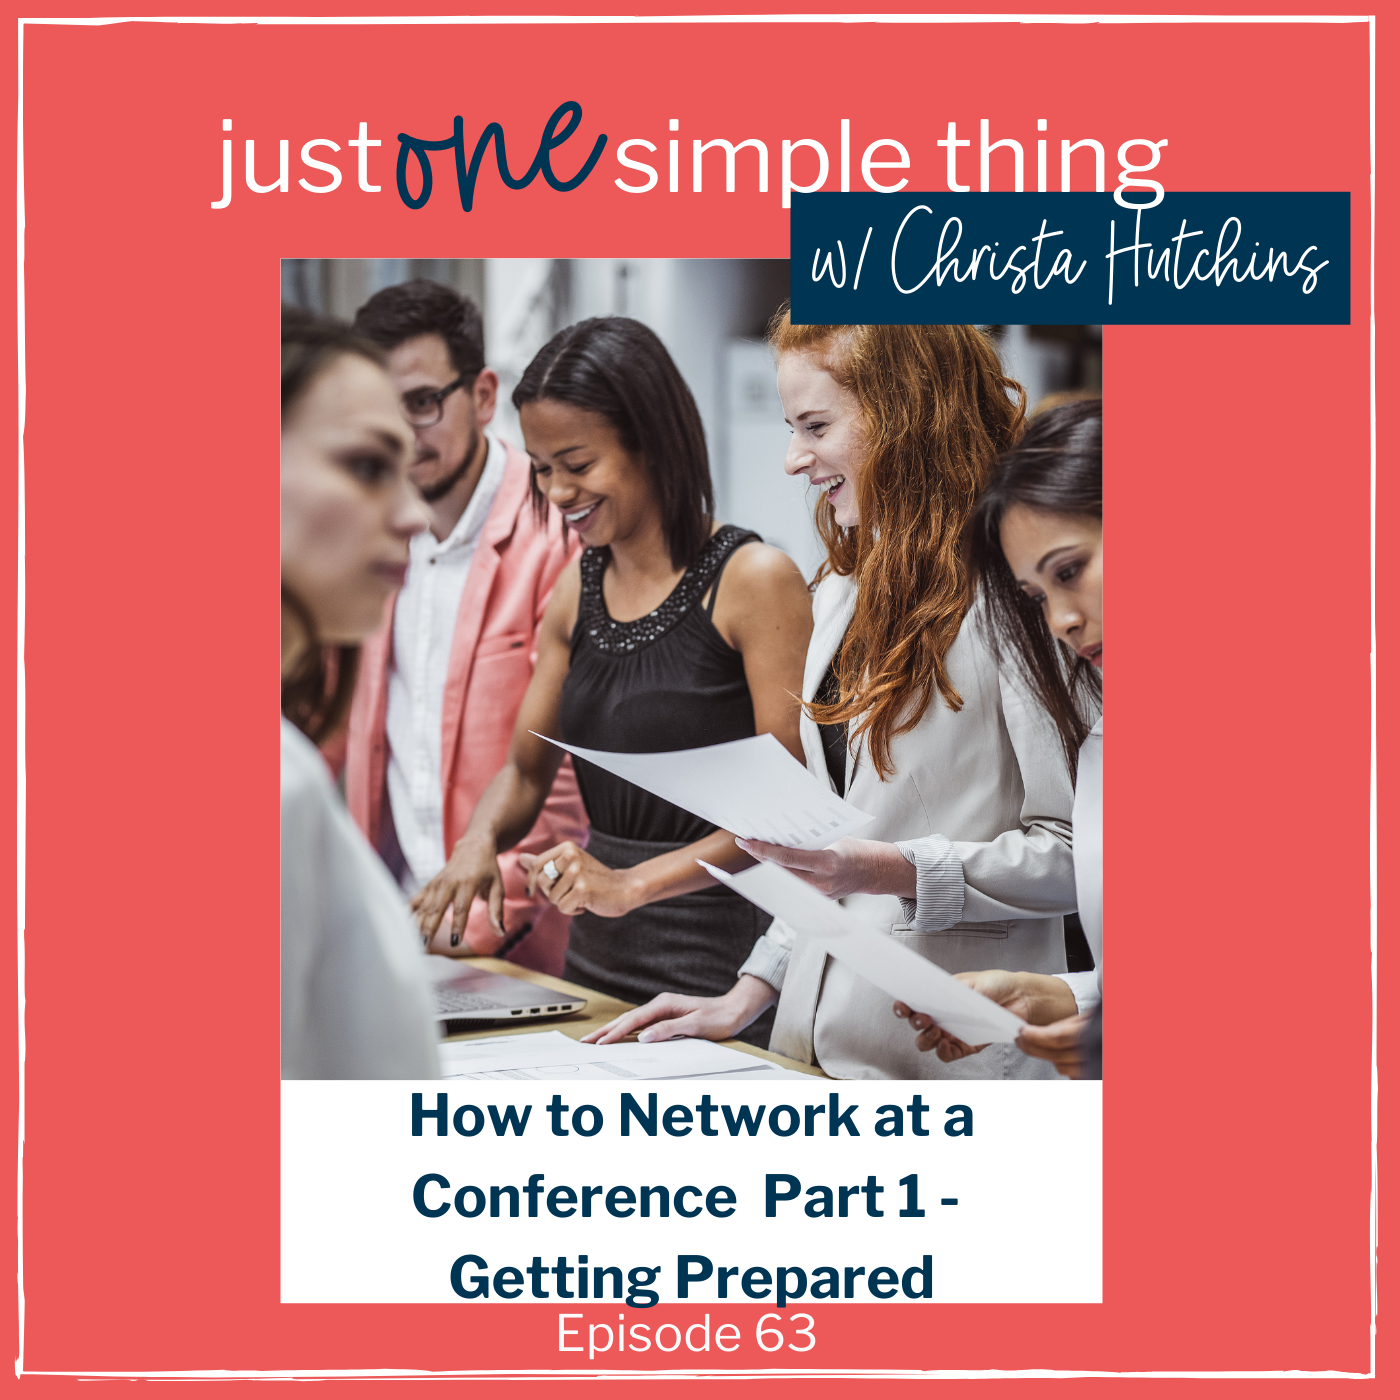 How to Network at a Conference Part 1 - Getting Prepared